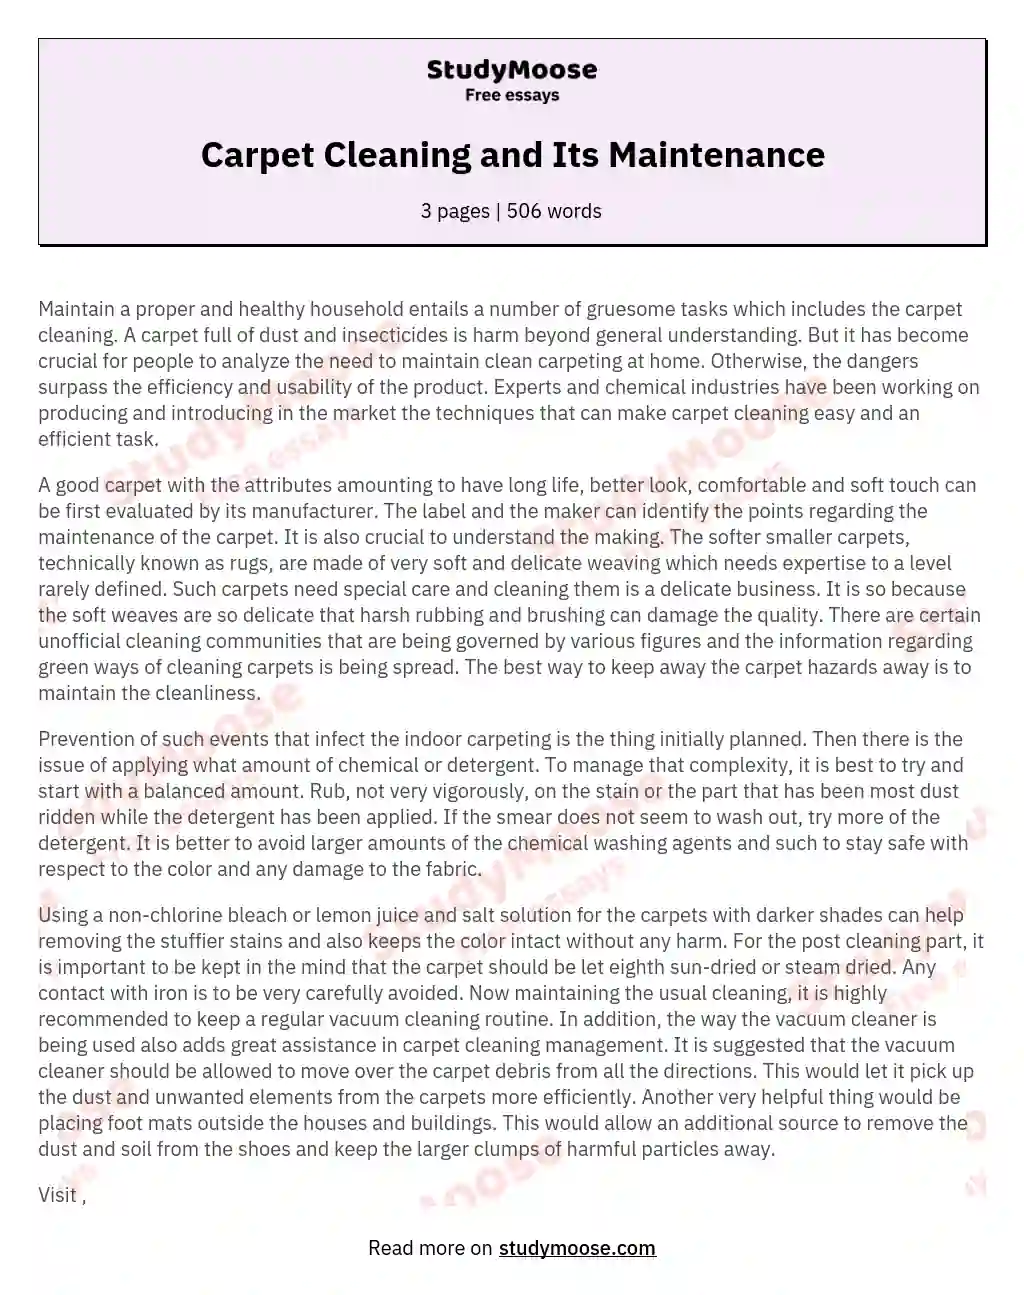 Carpet Cleaning and Its Maintenance essay